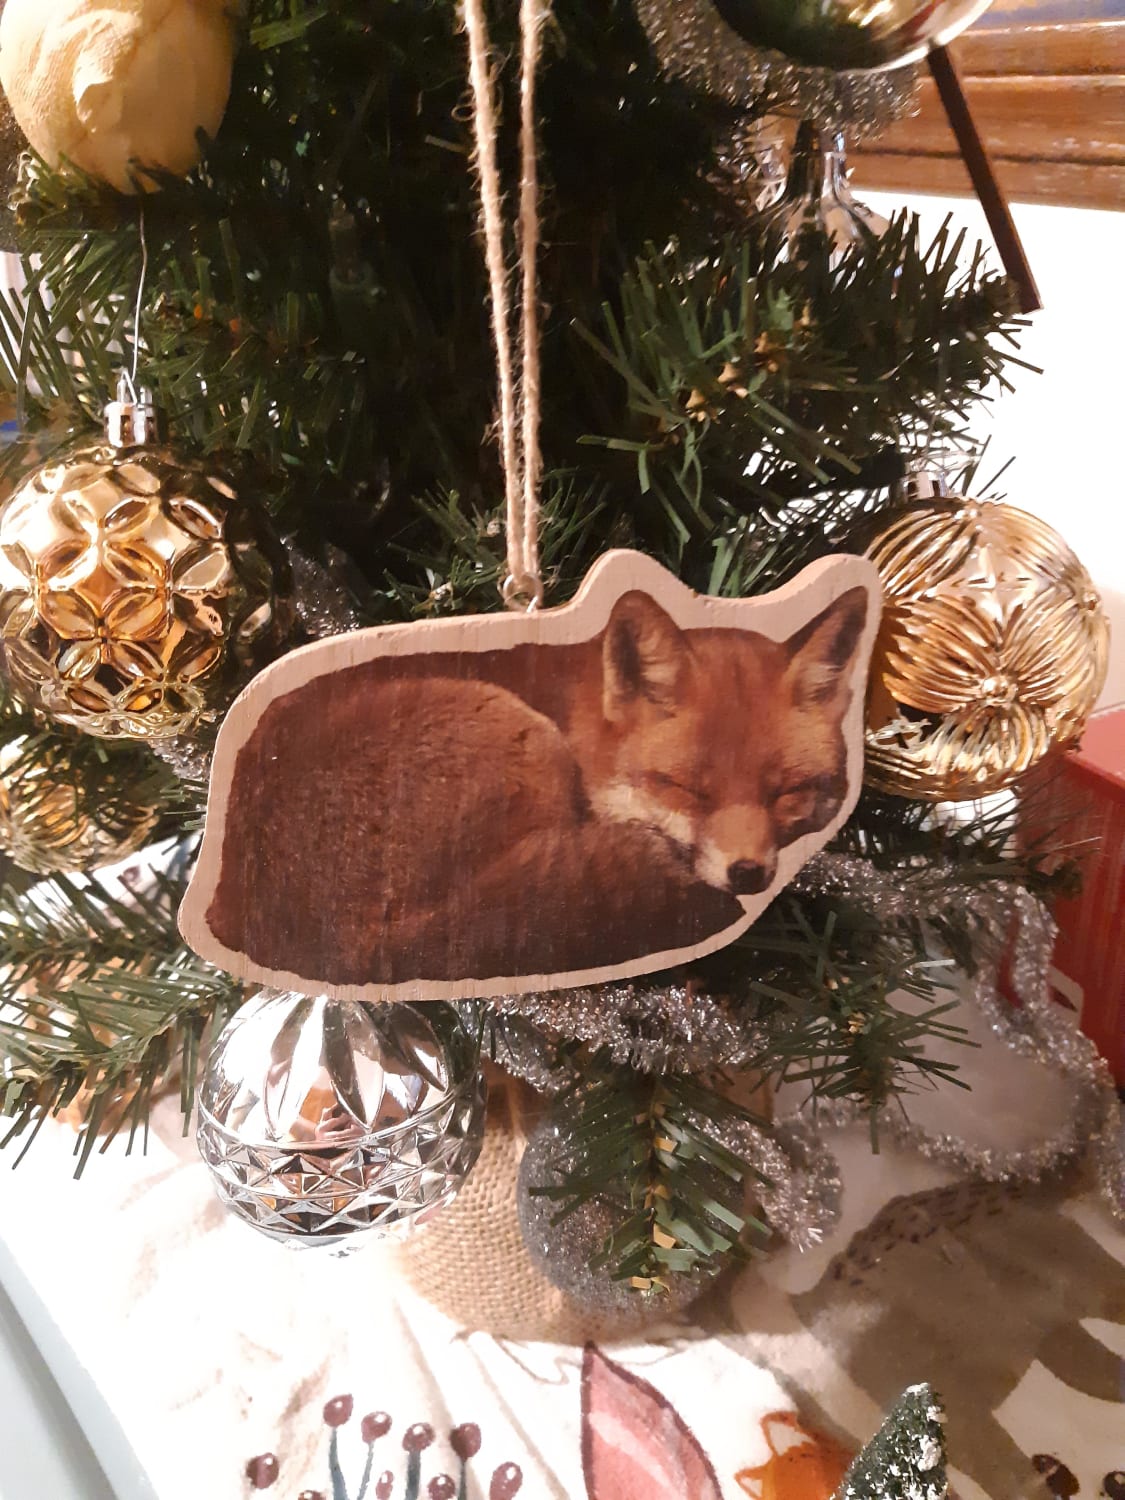 Just wanted to share the ornament I got for Christmas